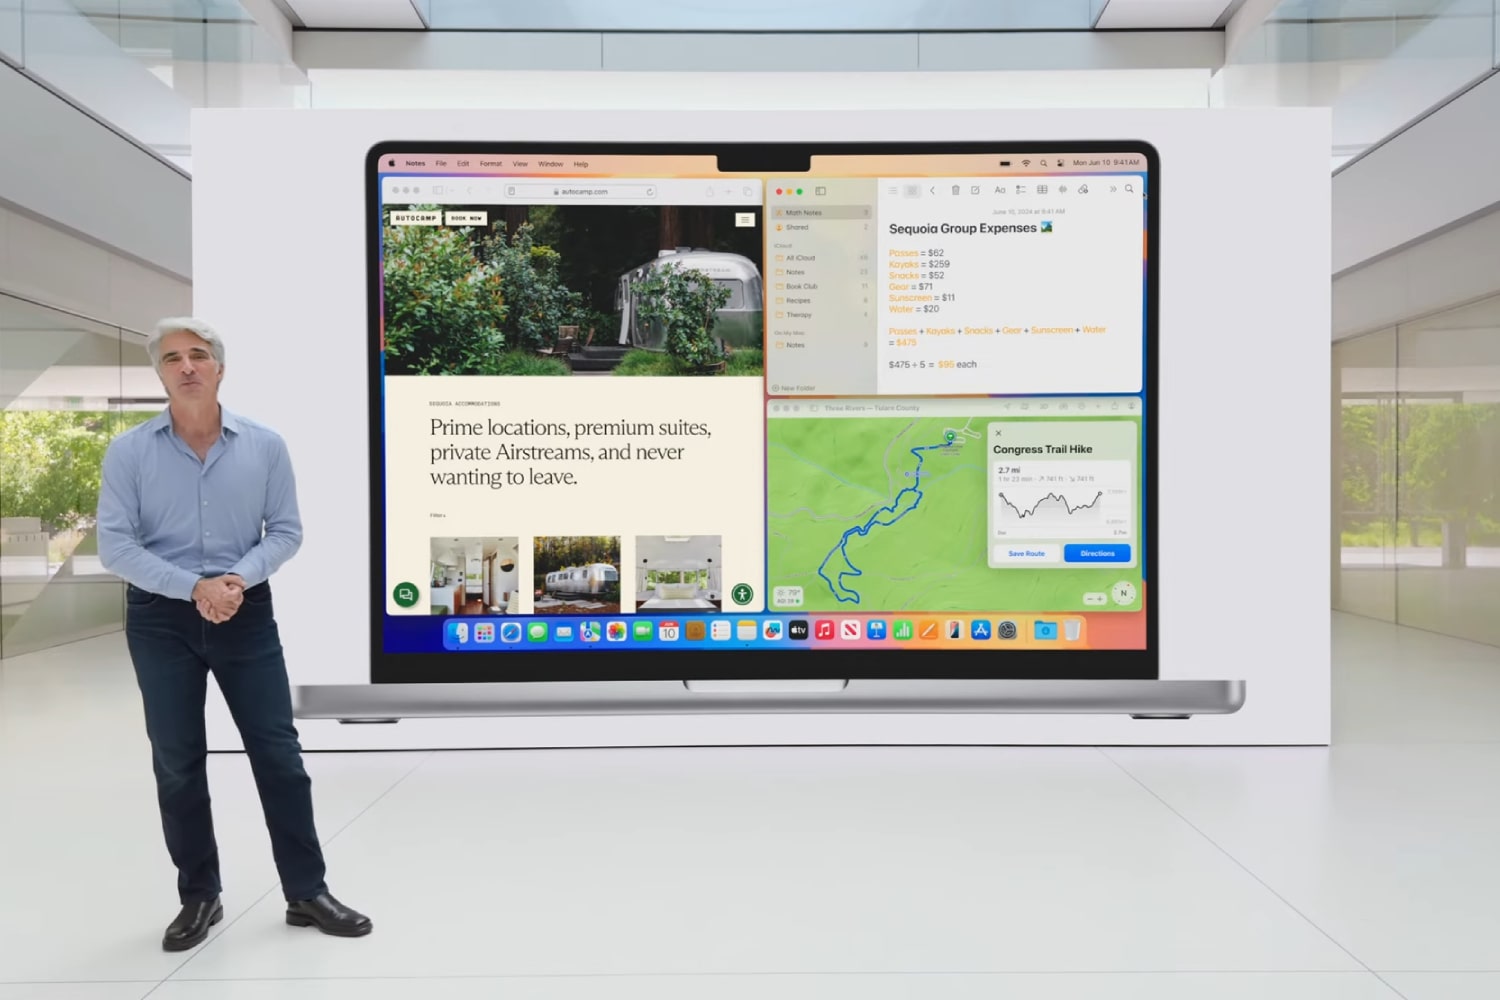 Apple's Craig Federighi introducing the new window tiling feature in macOS Sequoia at the Worldwide Developers Conference (WWDC) 2024.